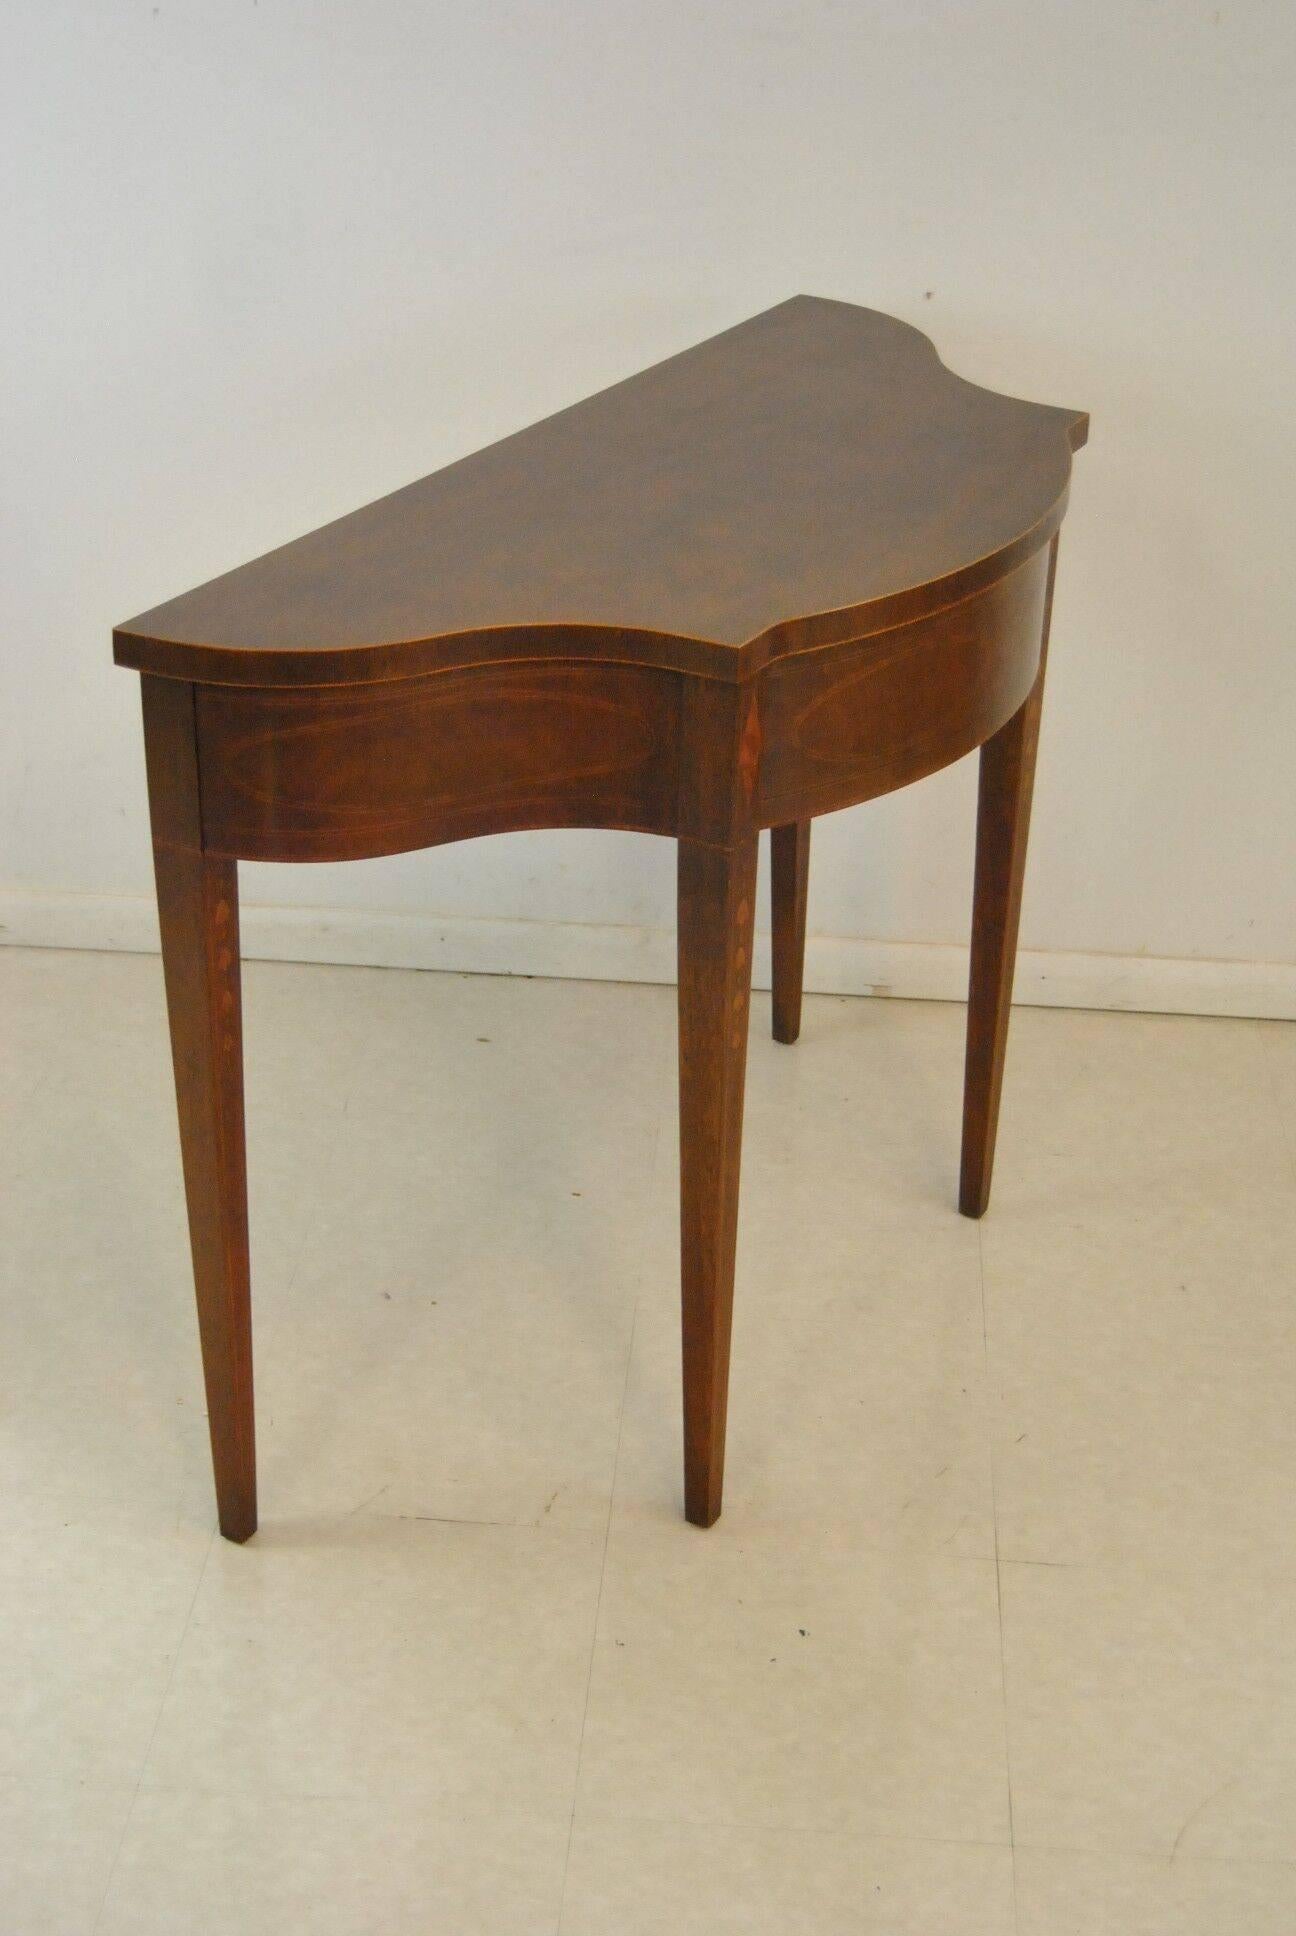 Federal Inlay Console Table by Baker Furniture from the Historic Charleston Collection